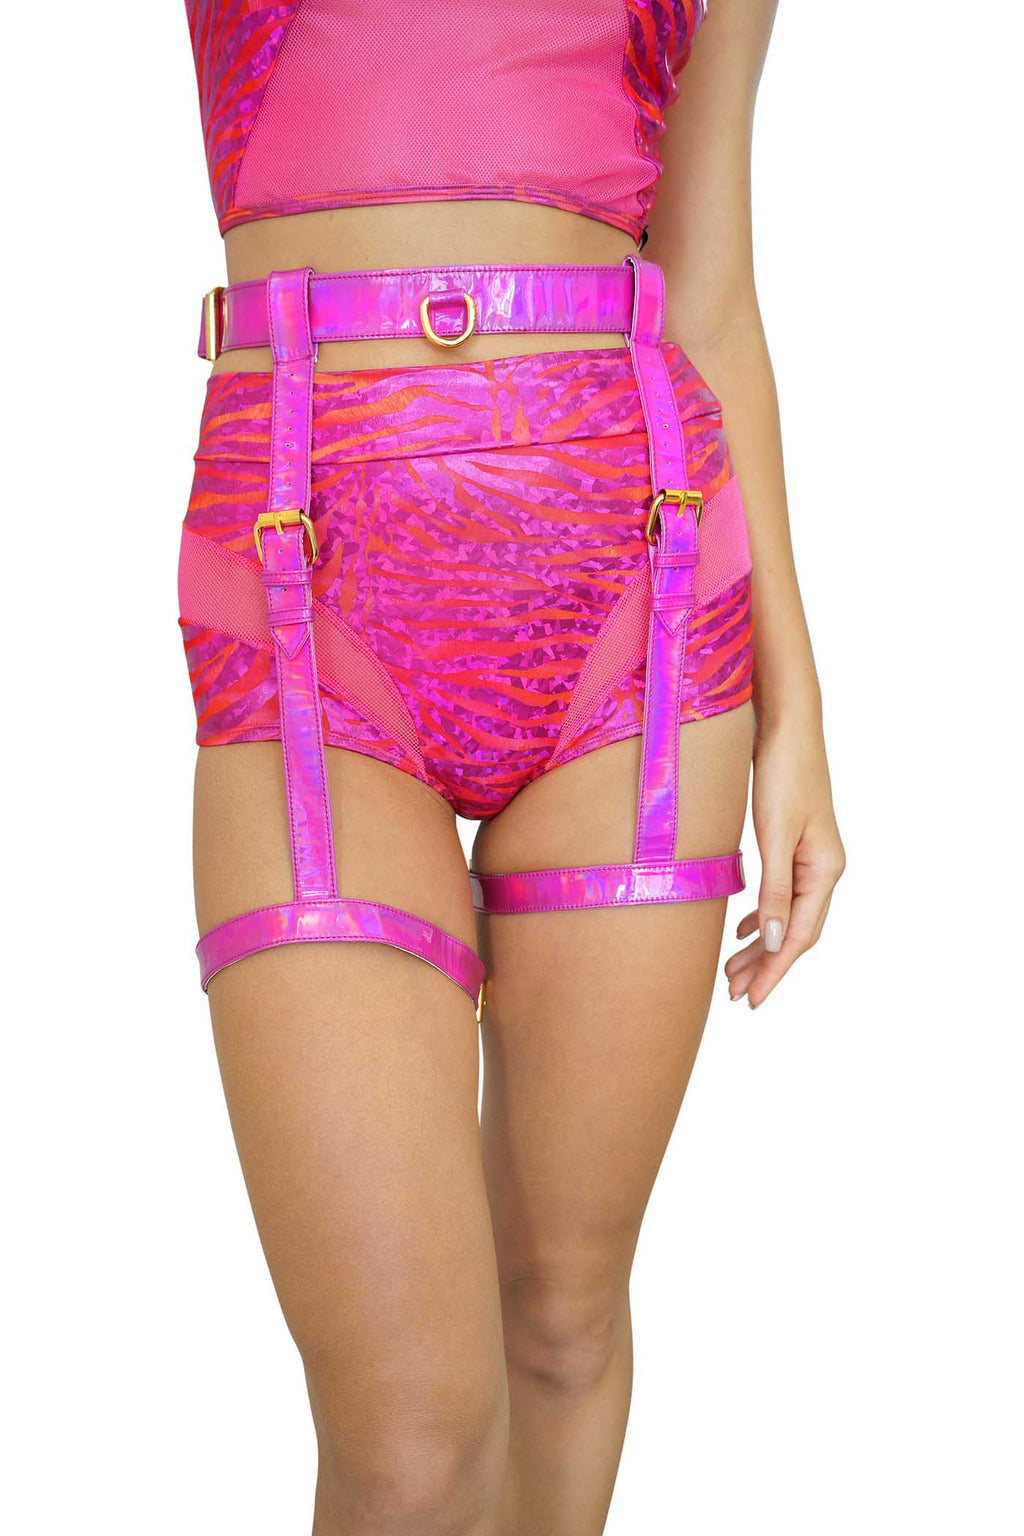 Holographic Leather Thigh Garter Leather Lingerie Waist Harness